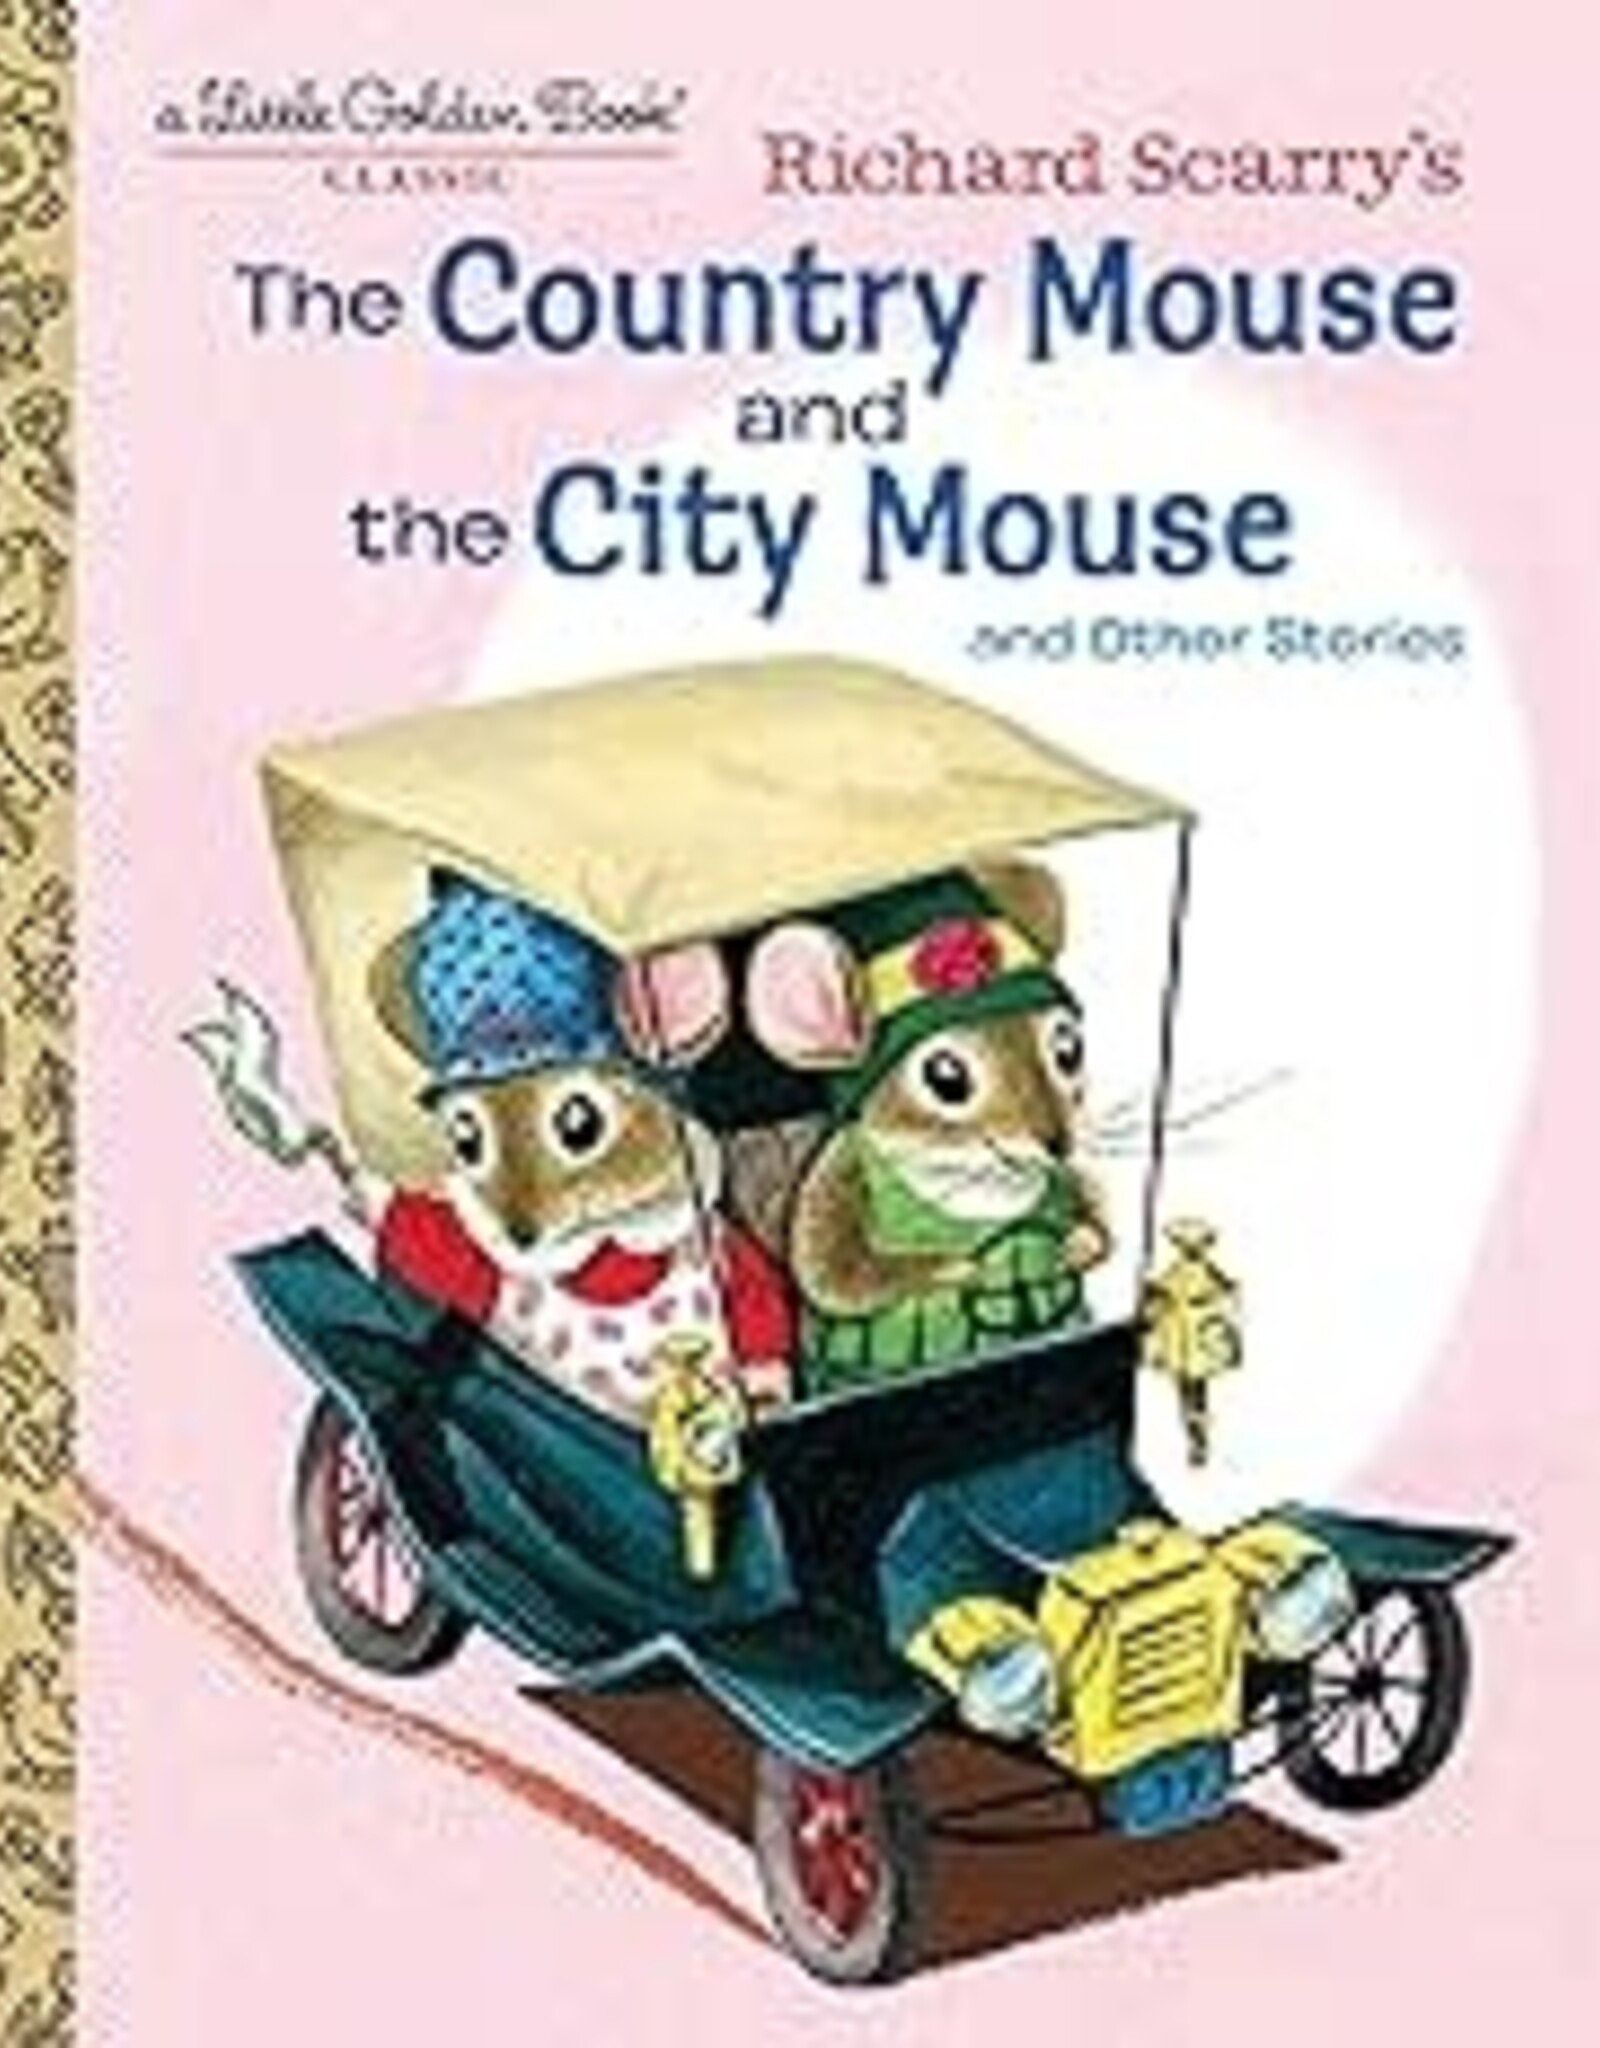 Penguin Random House LGB The Country Mouse & The City Mouse